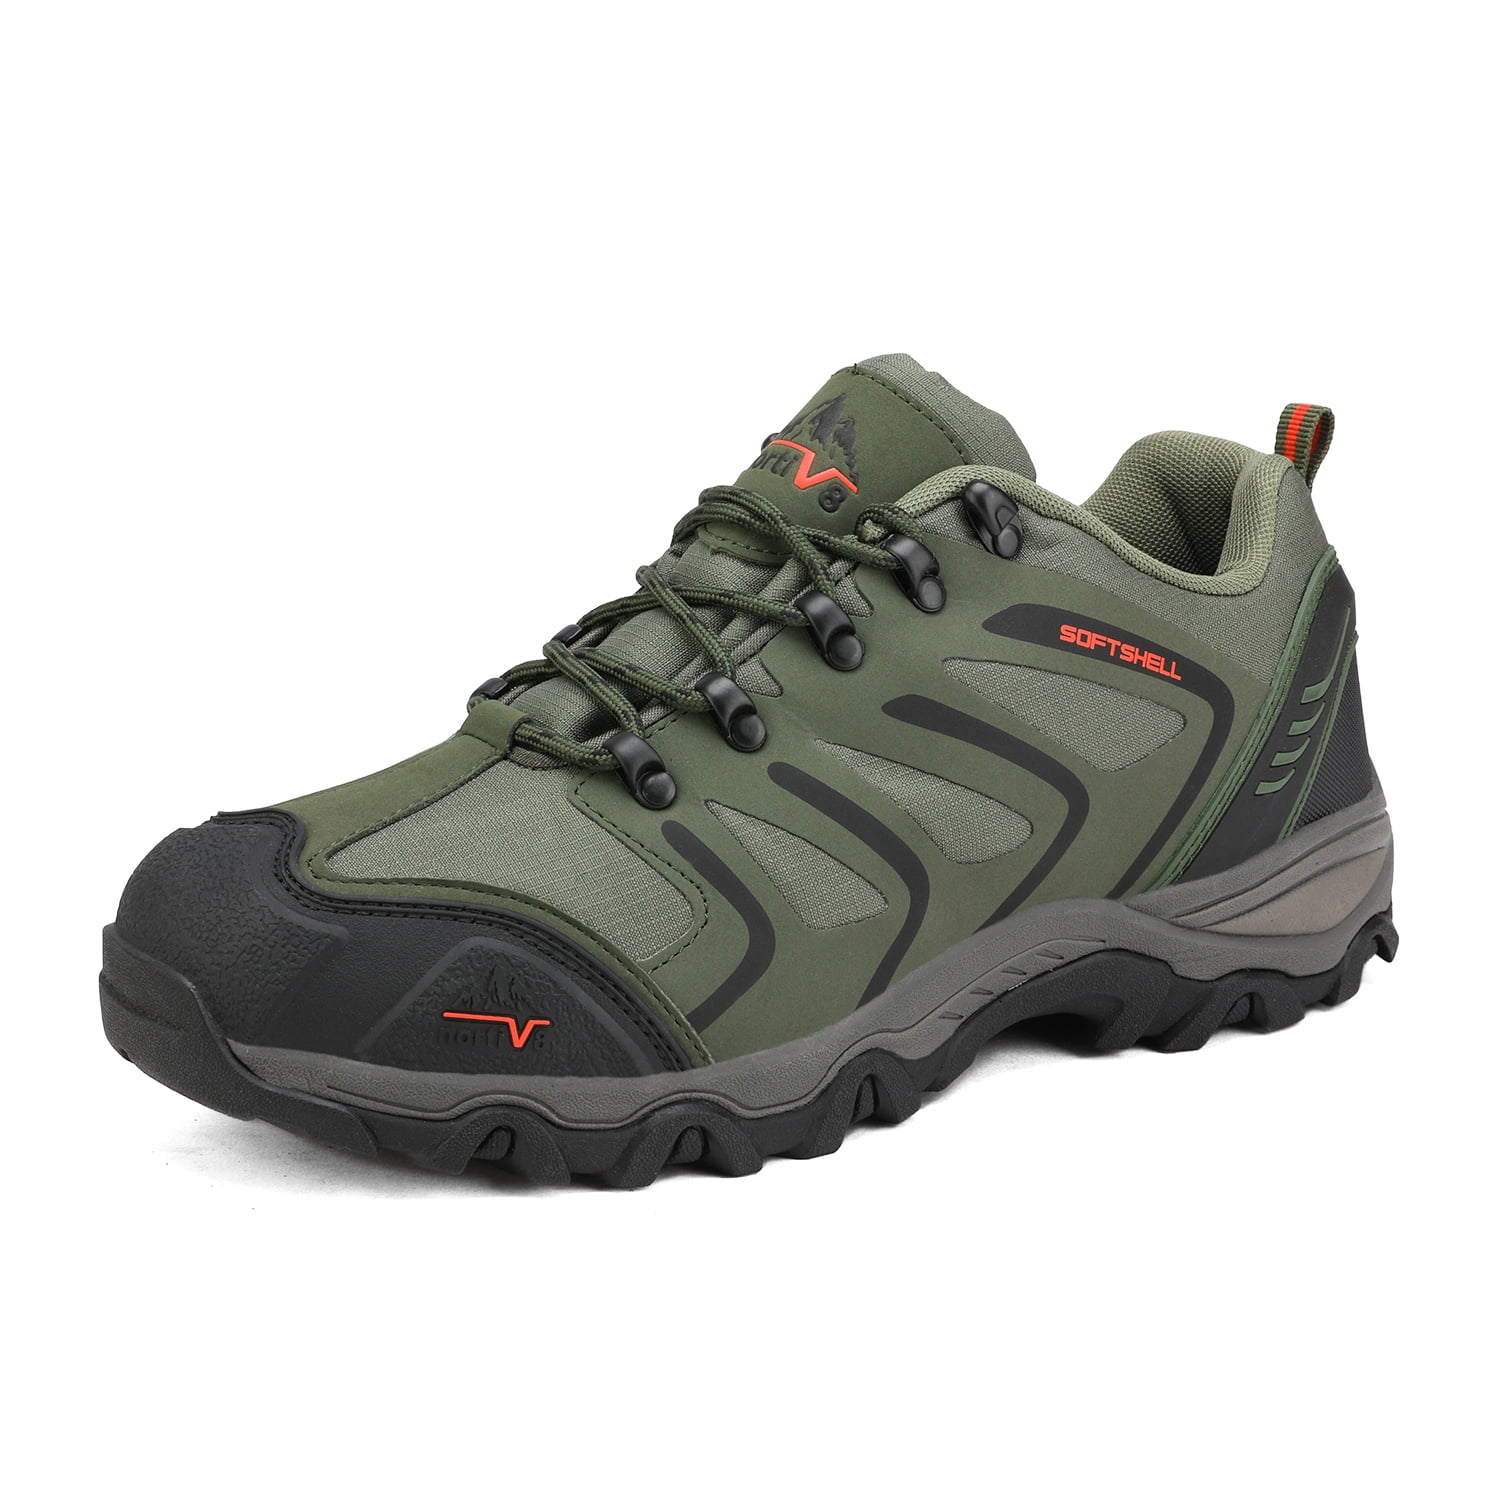 Slager Verdachte balans Nortiv 8 Men's Low Top Waterproof Outdoor Hiking Backpacking Work Boots  Shoes Us 160448_Low Army/Green/Black/Orange Size 6.5 - Walmart.com